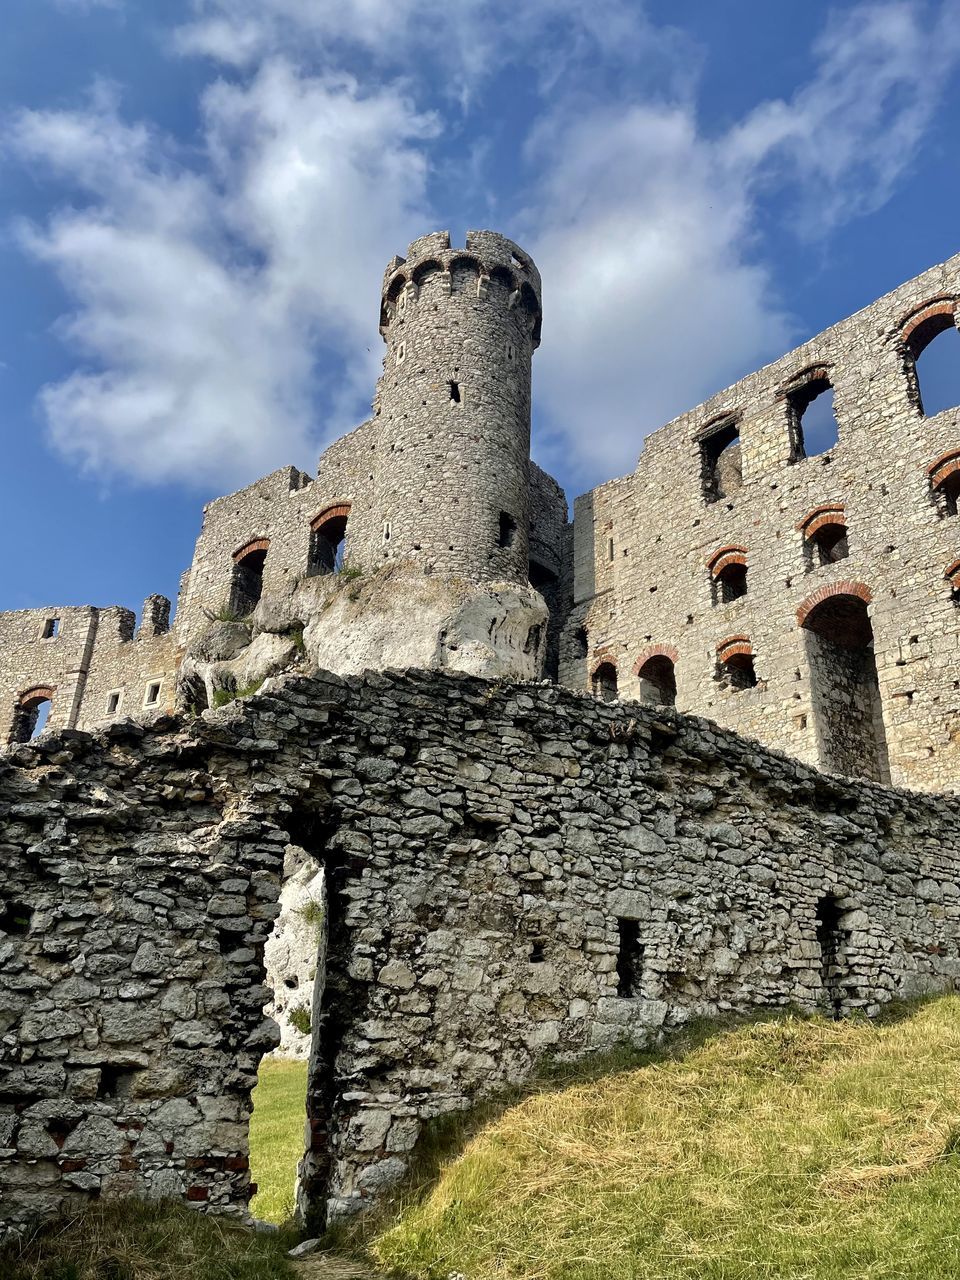 Architecture History The Past Built Structure Castle Building Exterior Sky Fortification Building Fort Ancient Travel Destinations Old Ruin Ruins Old Nature Cloud Château Wall Travel